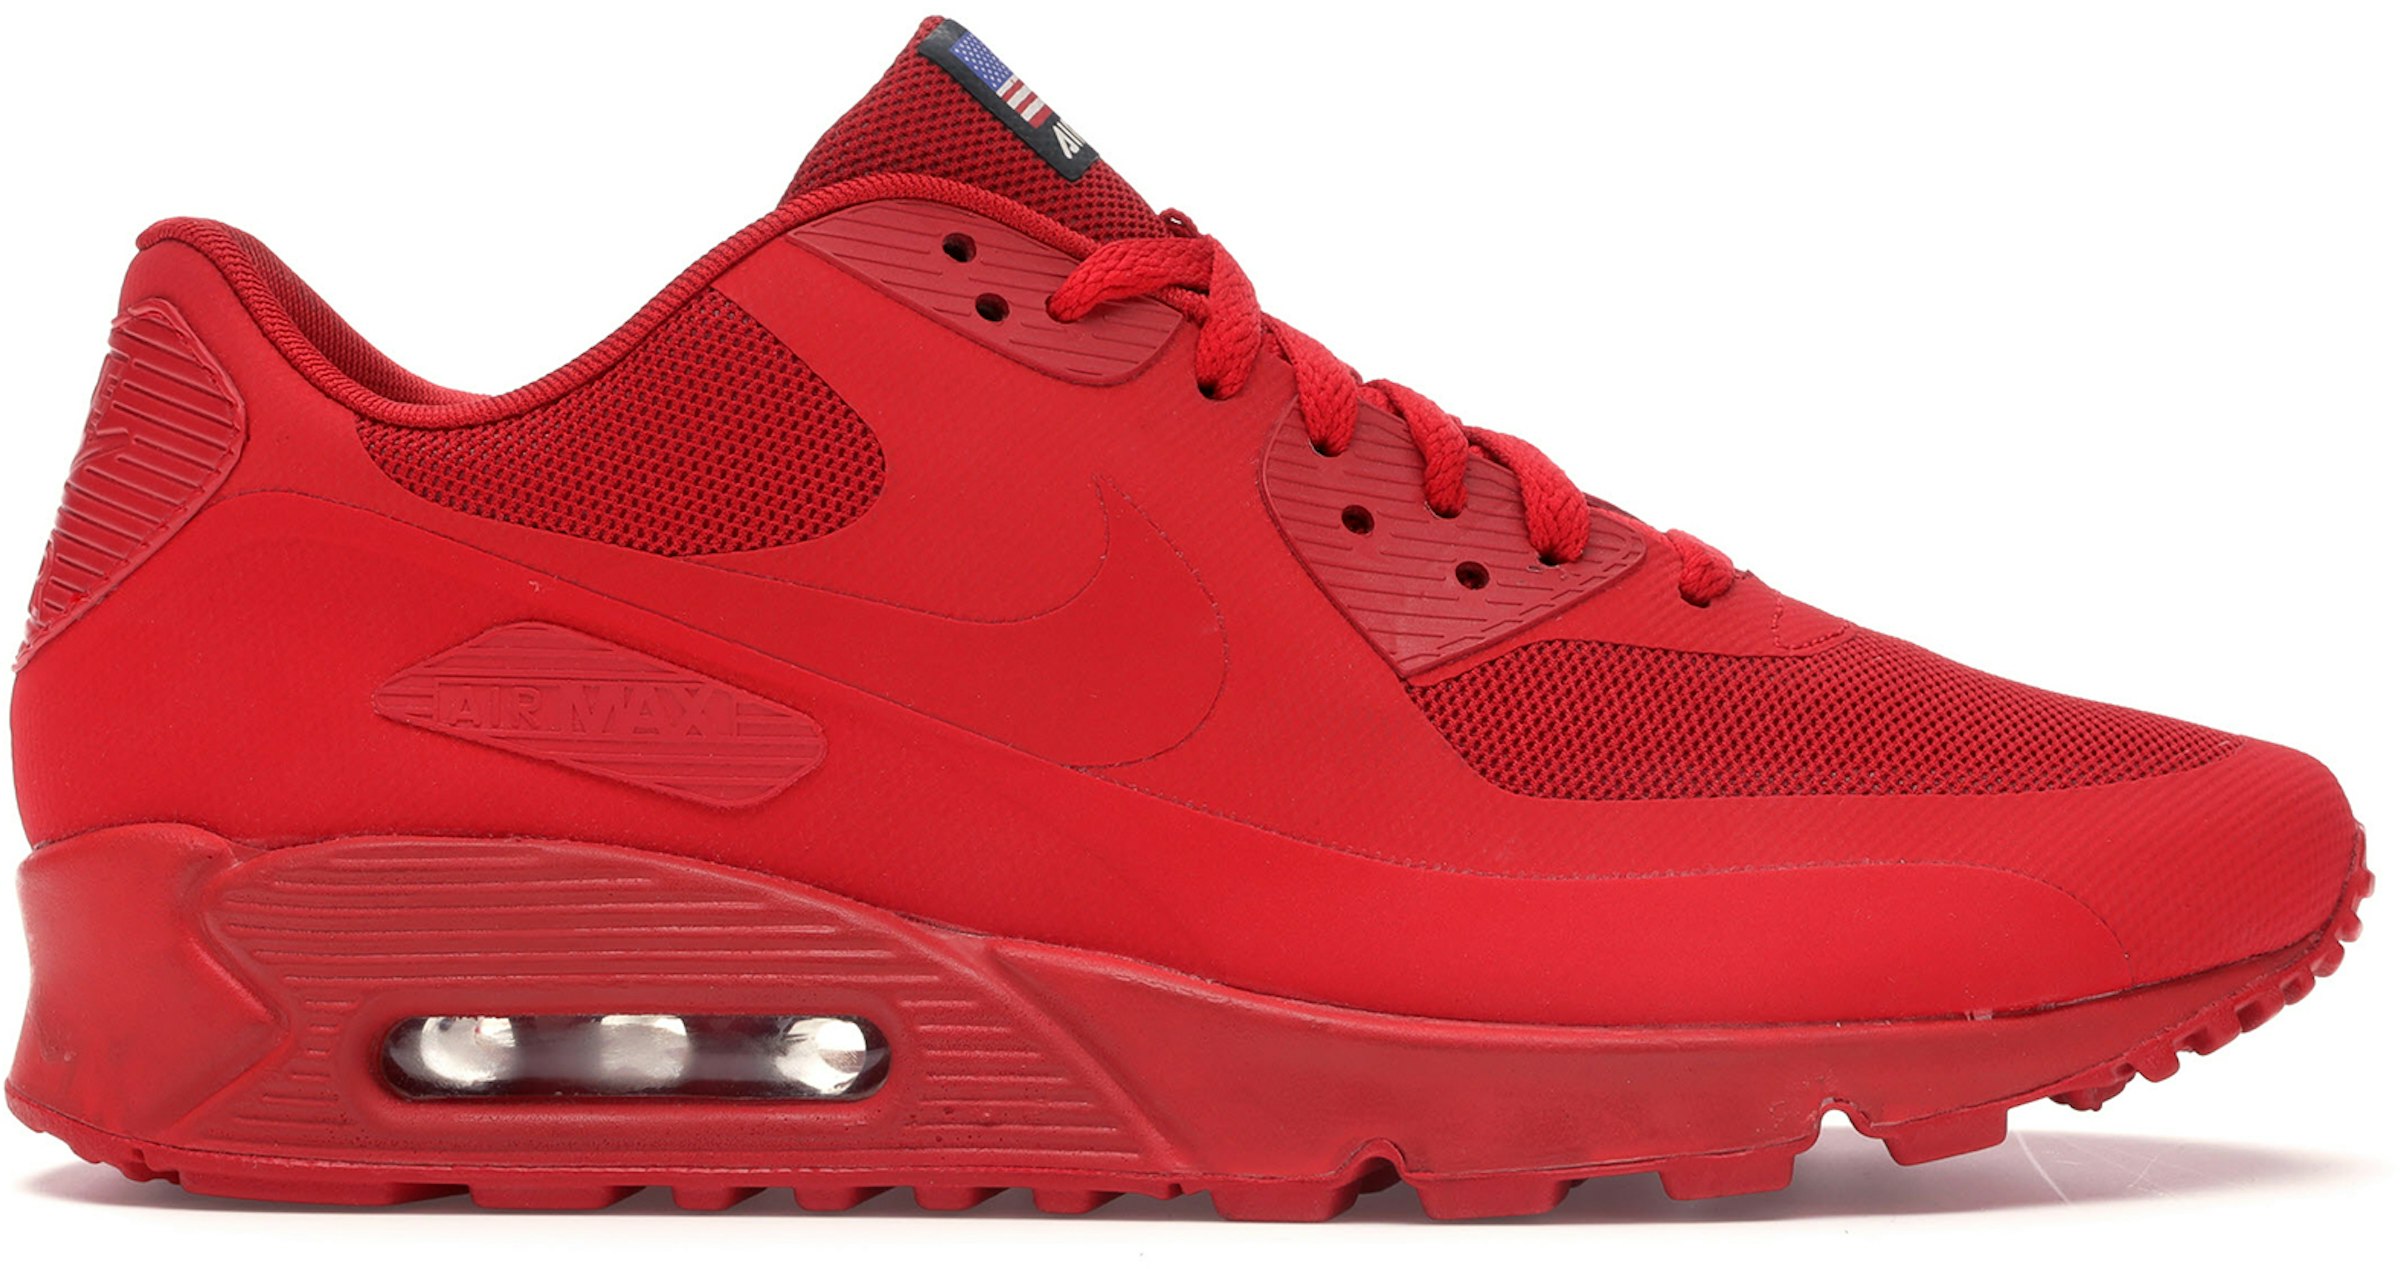 Soberano serie El otro día Nike Air Max 90 Hyperfuse Independence Day Red Men's - 613841-660 - US